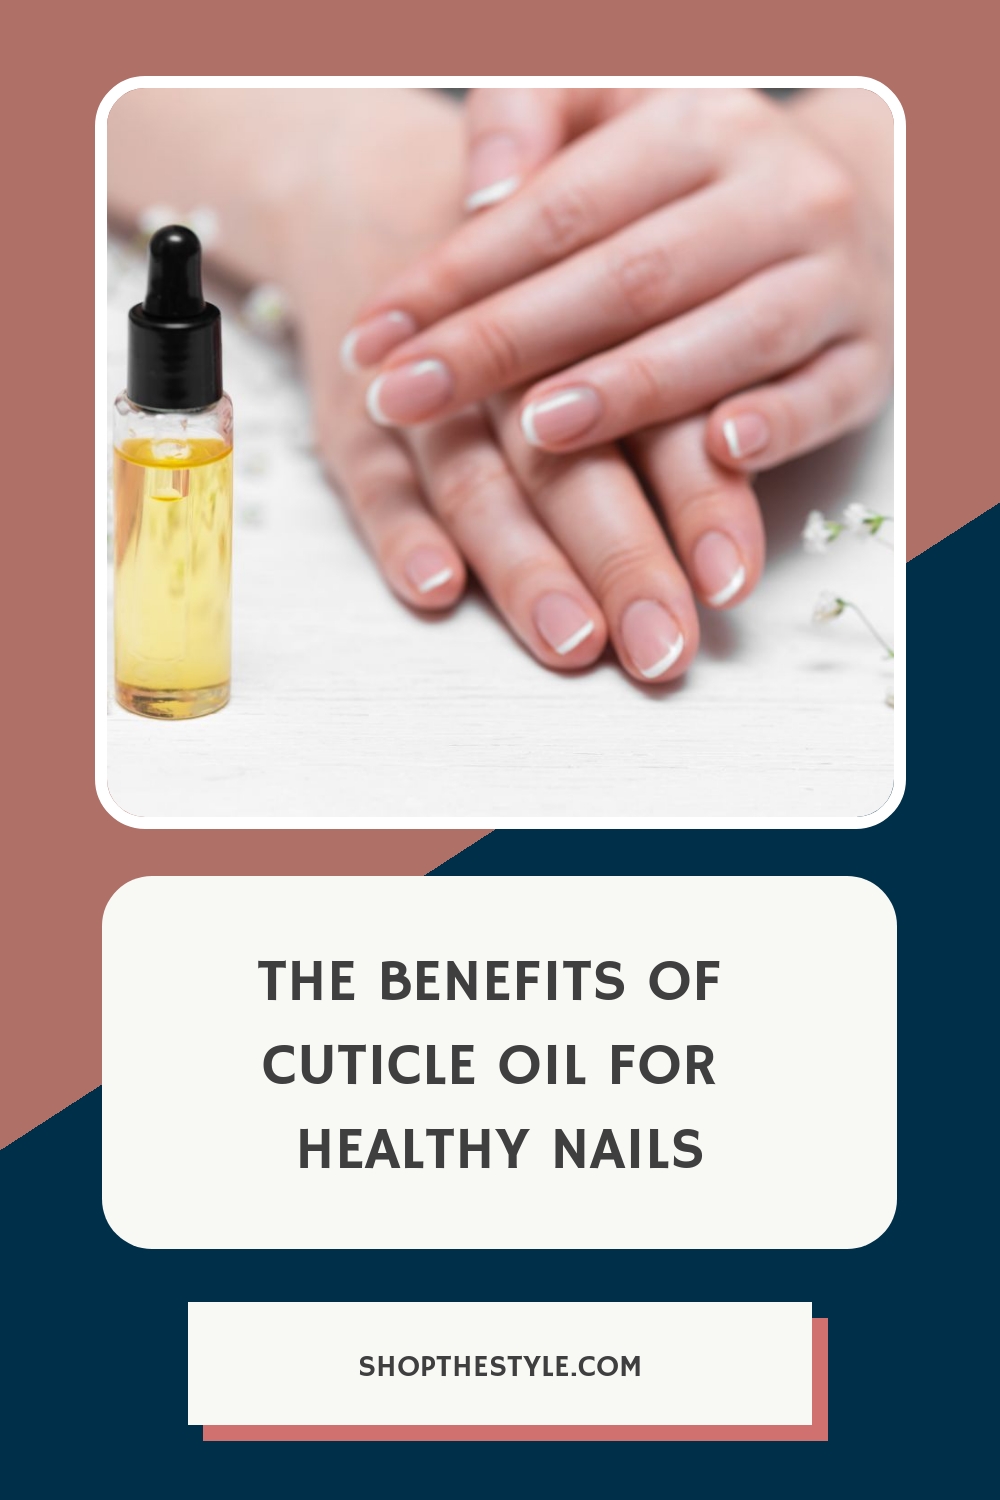 The Benefits of Cuticle Oil for Healthy Nails